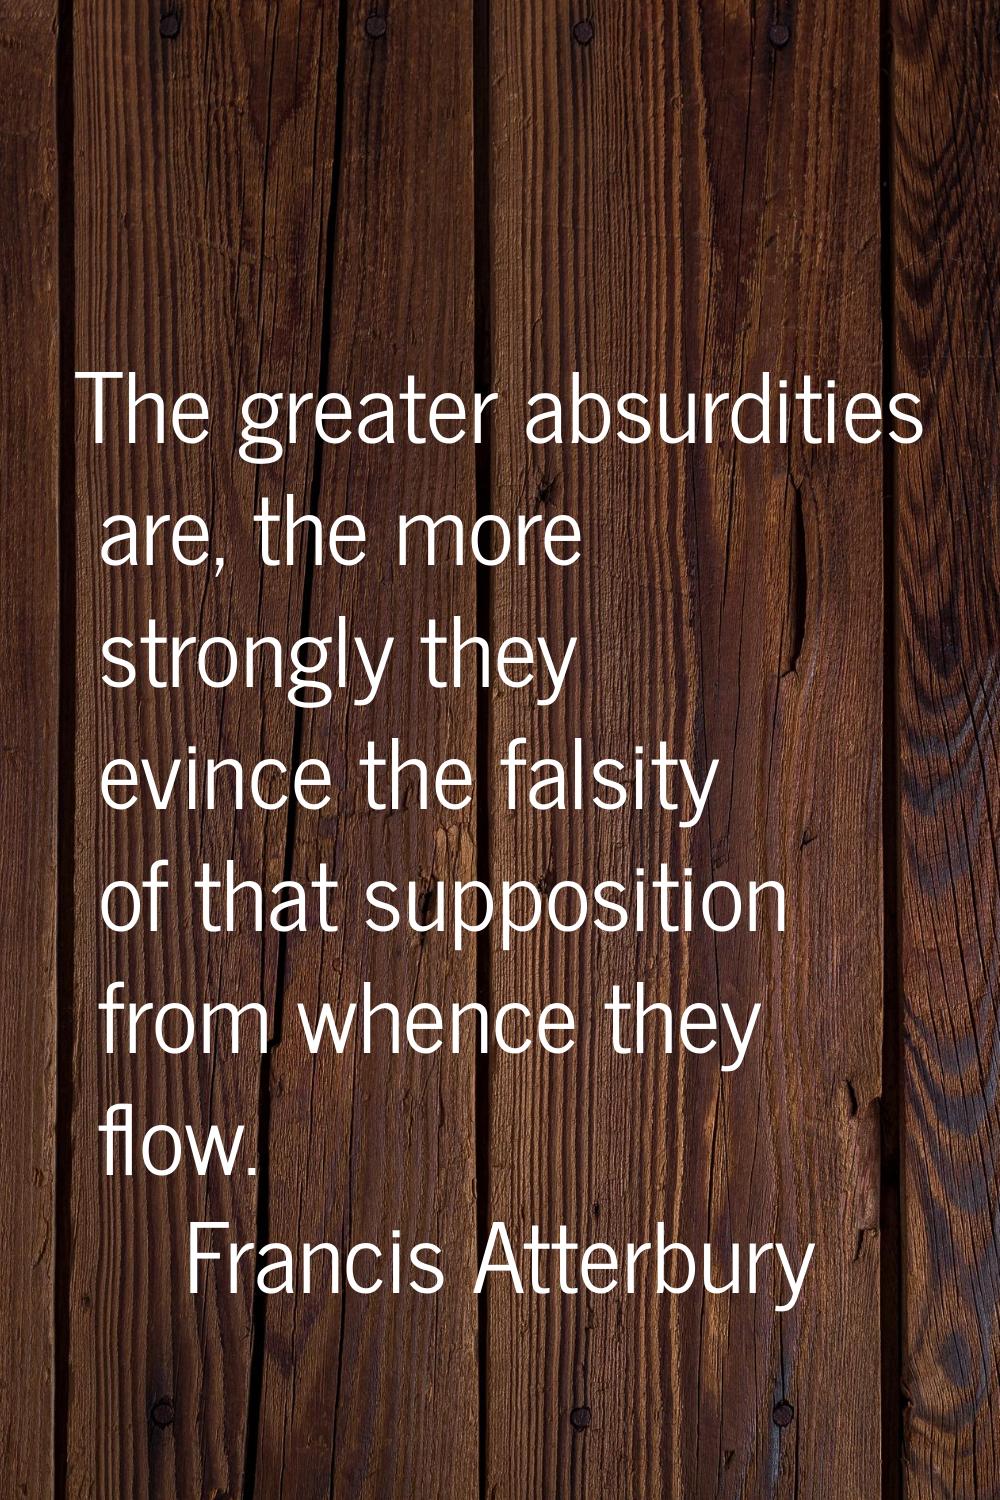 The greater absurdities are, the more strongly they evince the falsity of that supposition from whe